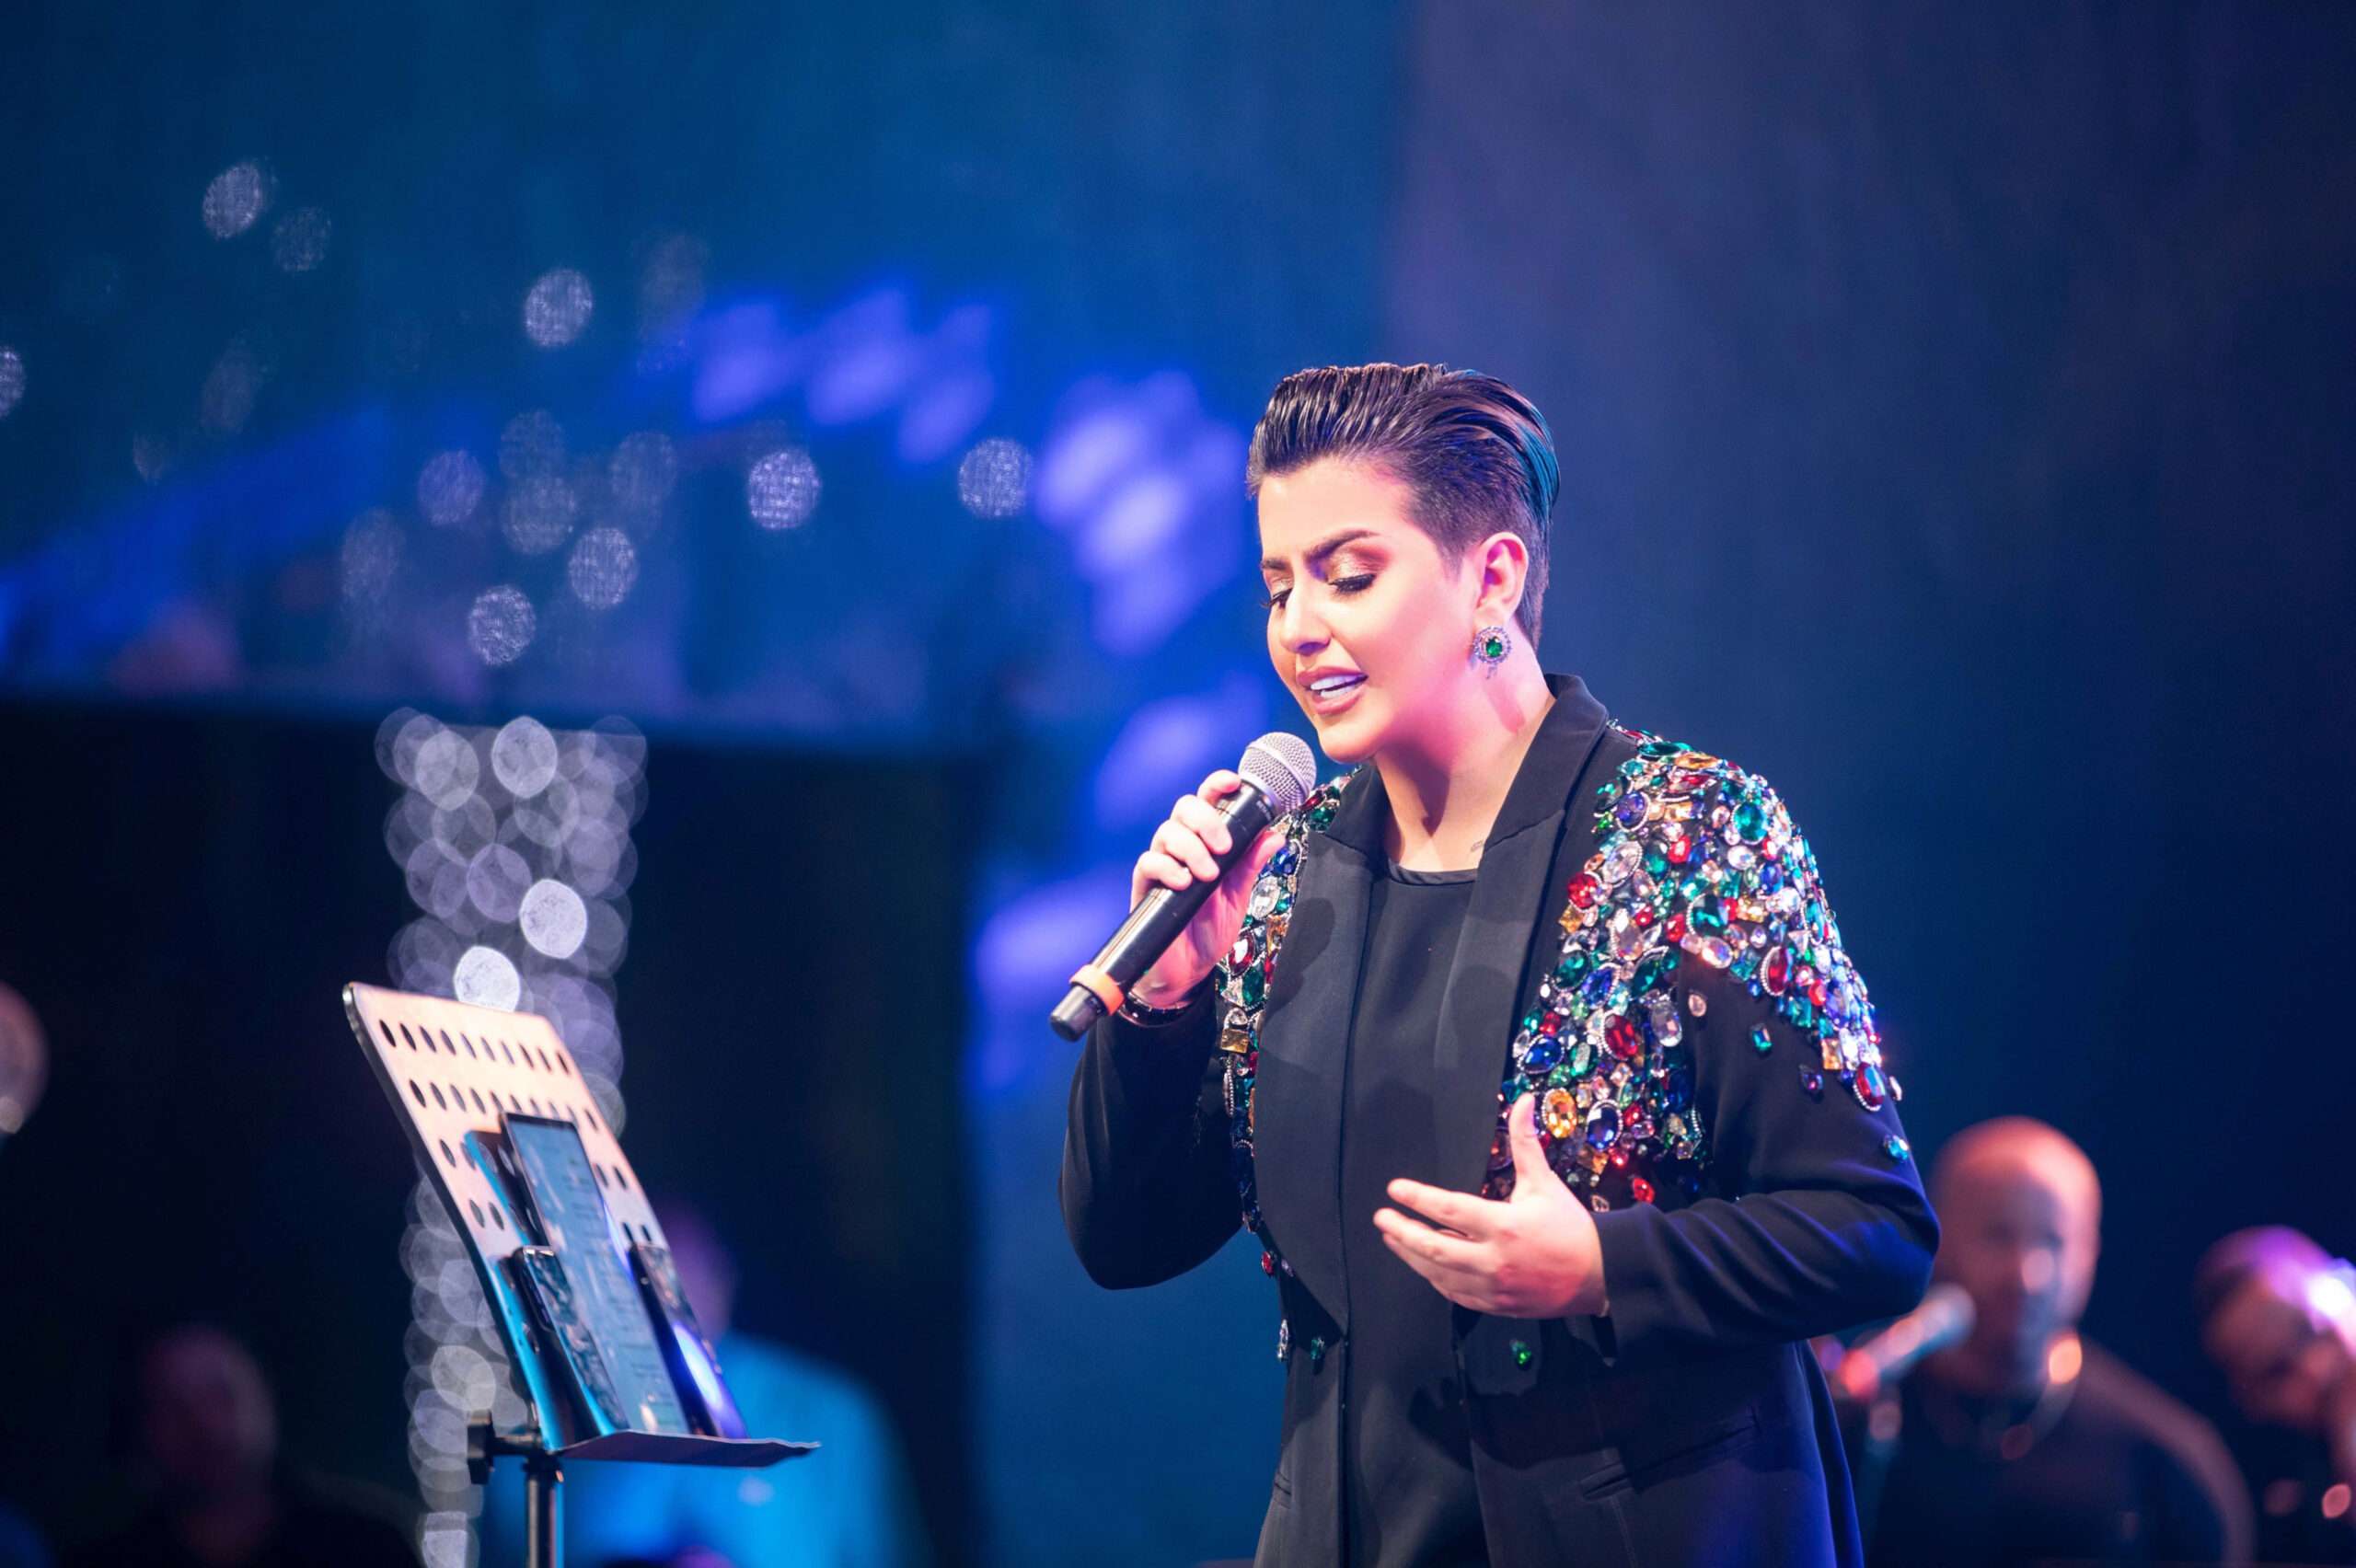 Image of a female singer performing on stage